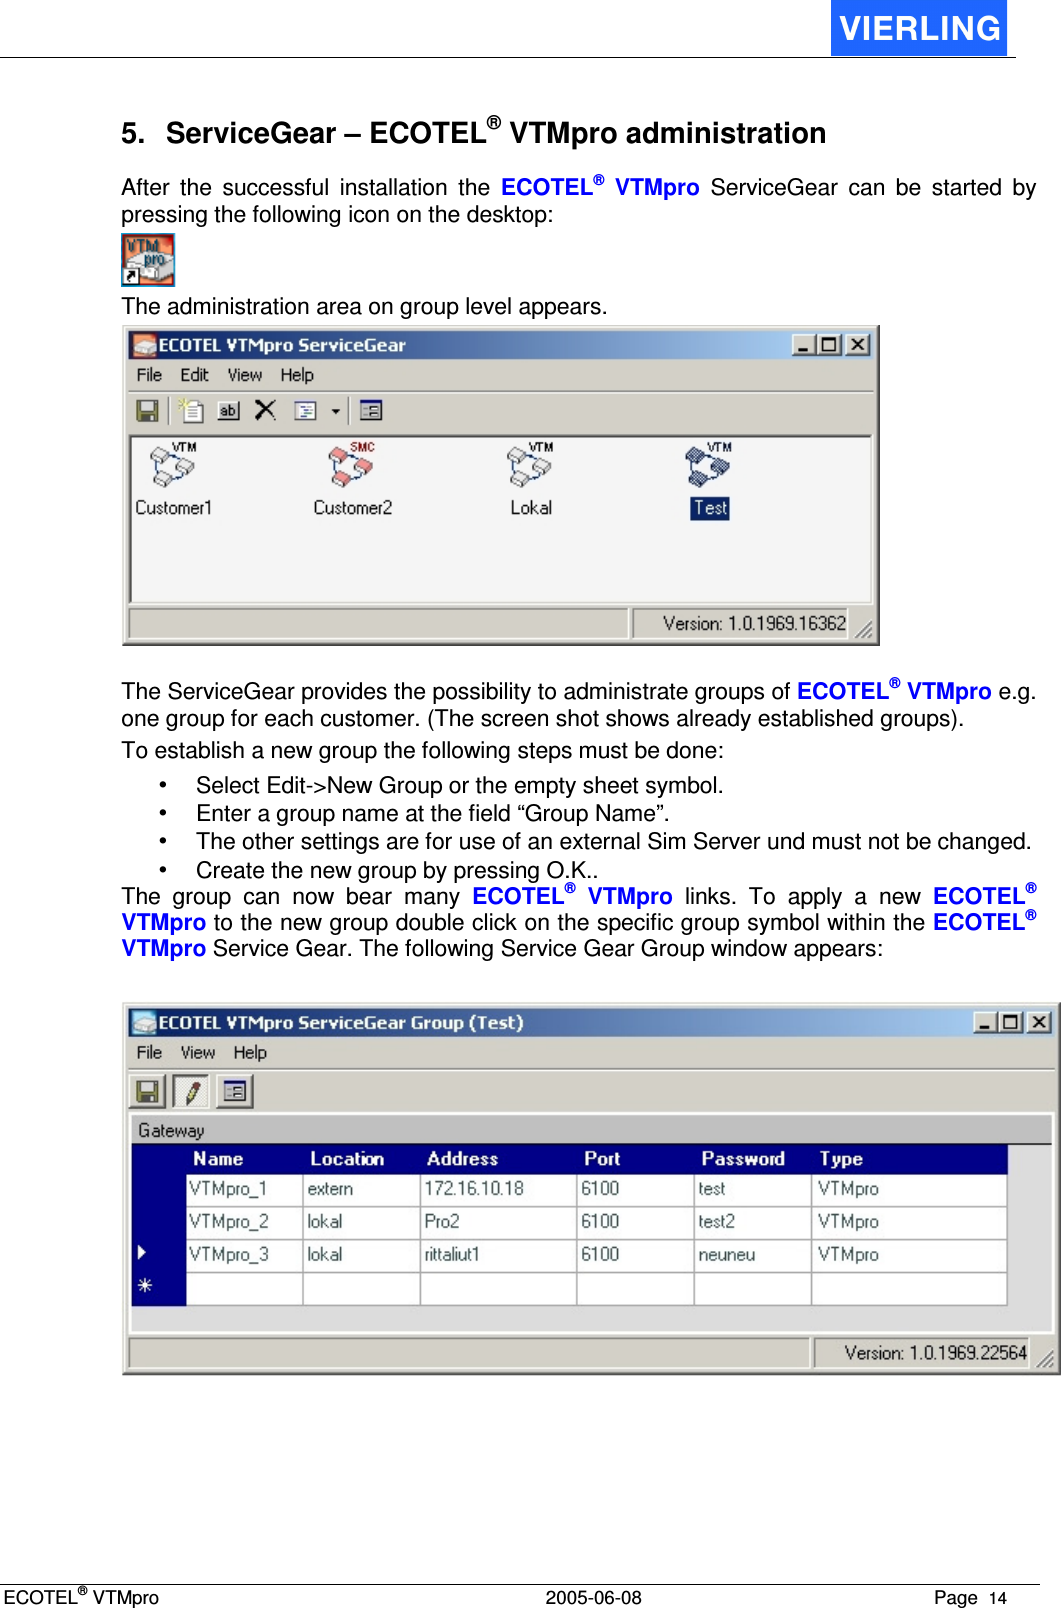 ECOTEL® VTMpro  2005-06-08 Page  14    5.  ServiceGear – ECOTEL® VTMpro administration After  the  successful  installation  the  ECOTEL®  VTMpro  ServiceGear  can  be  started  by pressing the following icon on the desktop:  The administration area on group level appears.   The ServiceGear provides the possibility to administrate groups of ECOTEL® VTMpro e.g. one group for each customer. (The screen shot shows already established groups). To establish a new group the following steps must be done: • Select Edit-&gt;New Group or the empty sheet symbol. • Enter a group name at the field “Group Name”. • The other settings are for use of an external Sim Server und must not be changed. • Create the new group by pressing O.K.. The  group  can  now  bear  many  ECOTEL®  VTMpro  links.  To  apply  a  new  ECOTEL® VTMpro to the new group double click on the specific group symbol within the ECOTEL® VTMpro Service Gear. The following Service Gear Group window appears:   